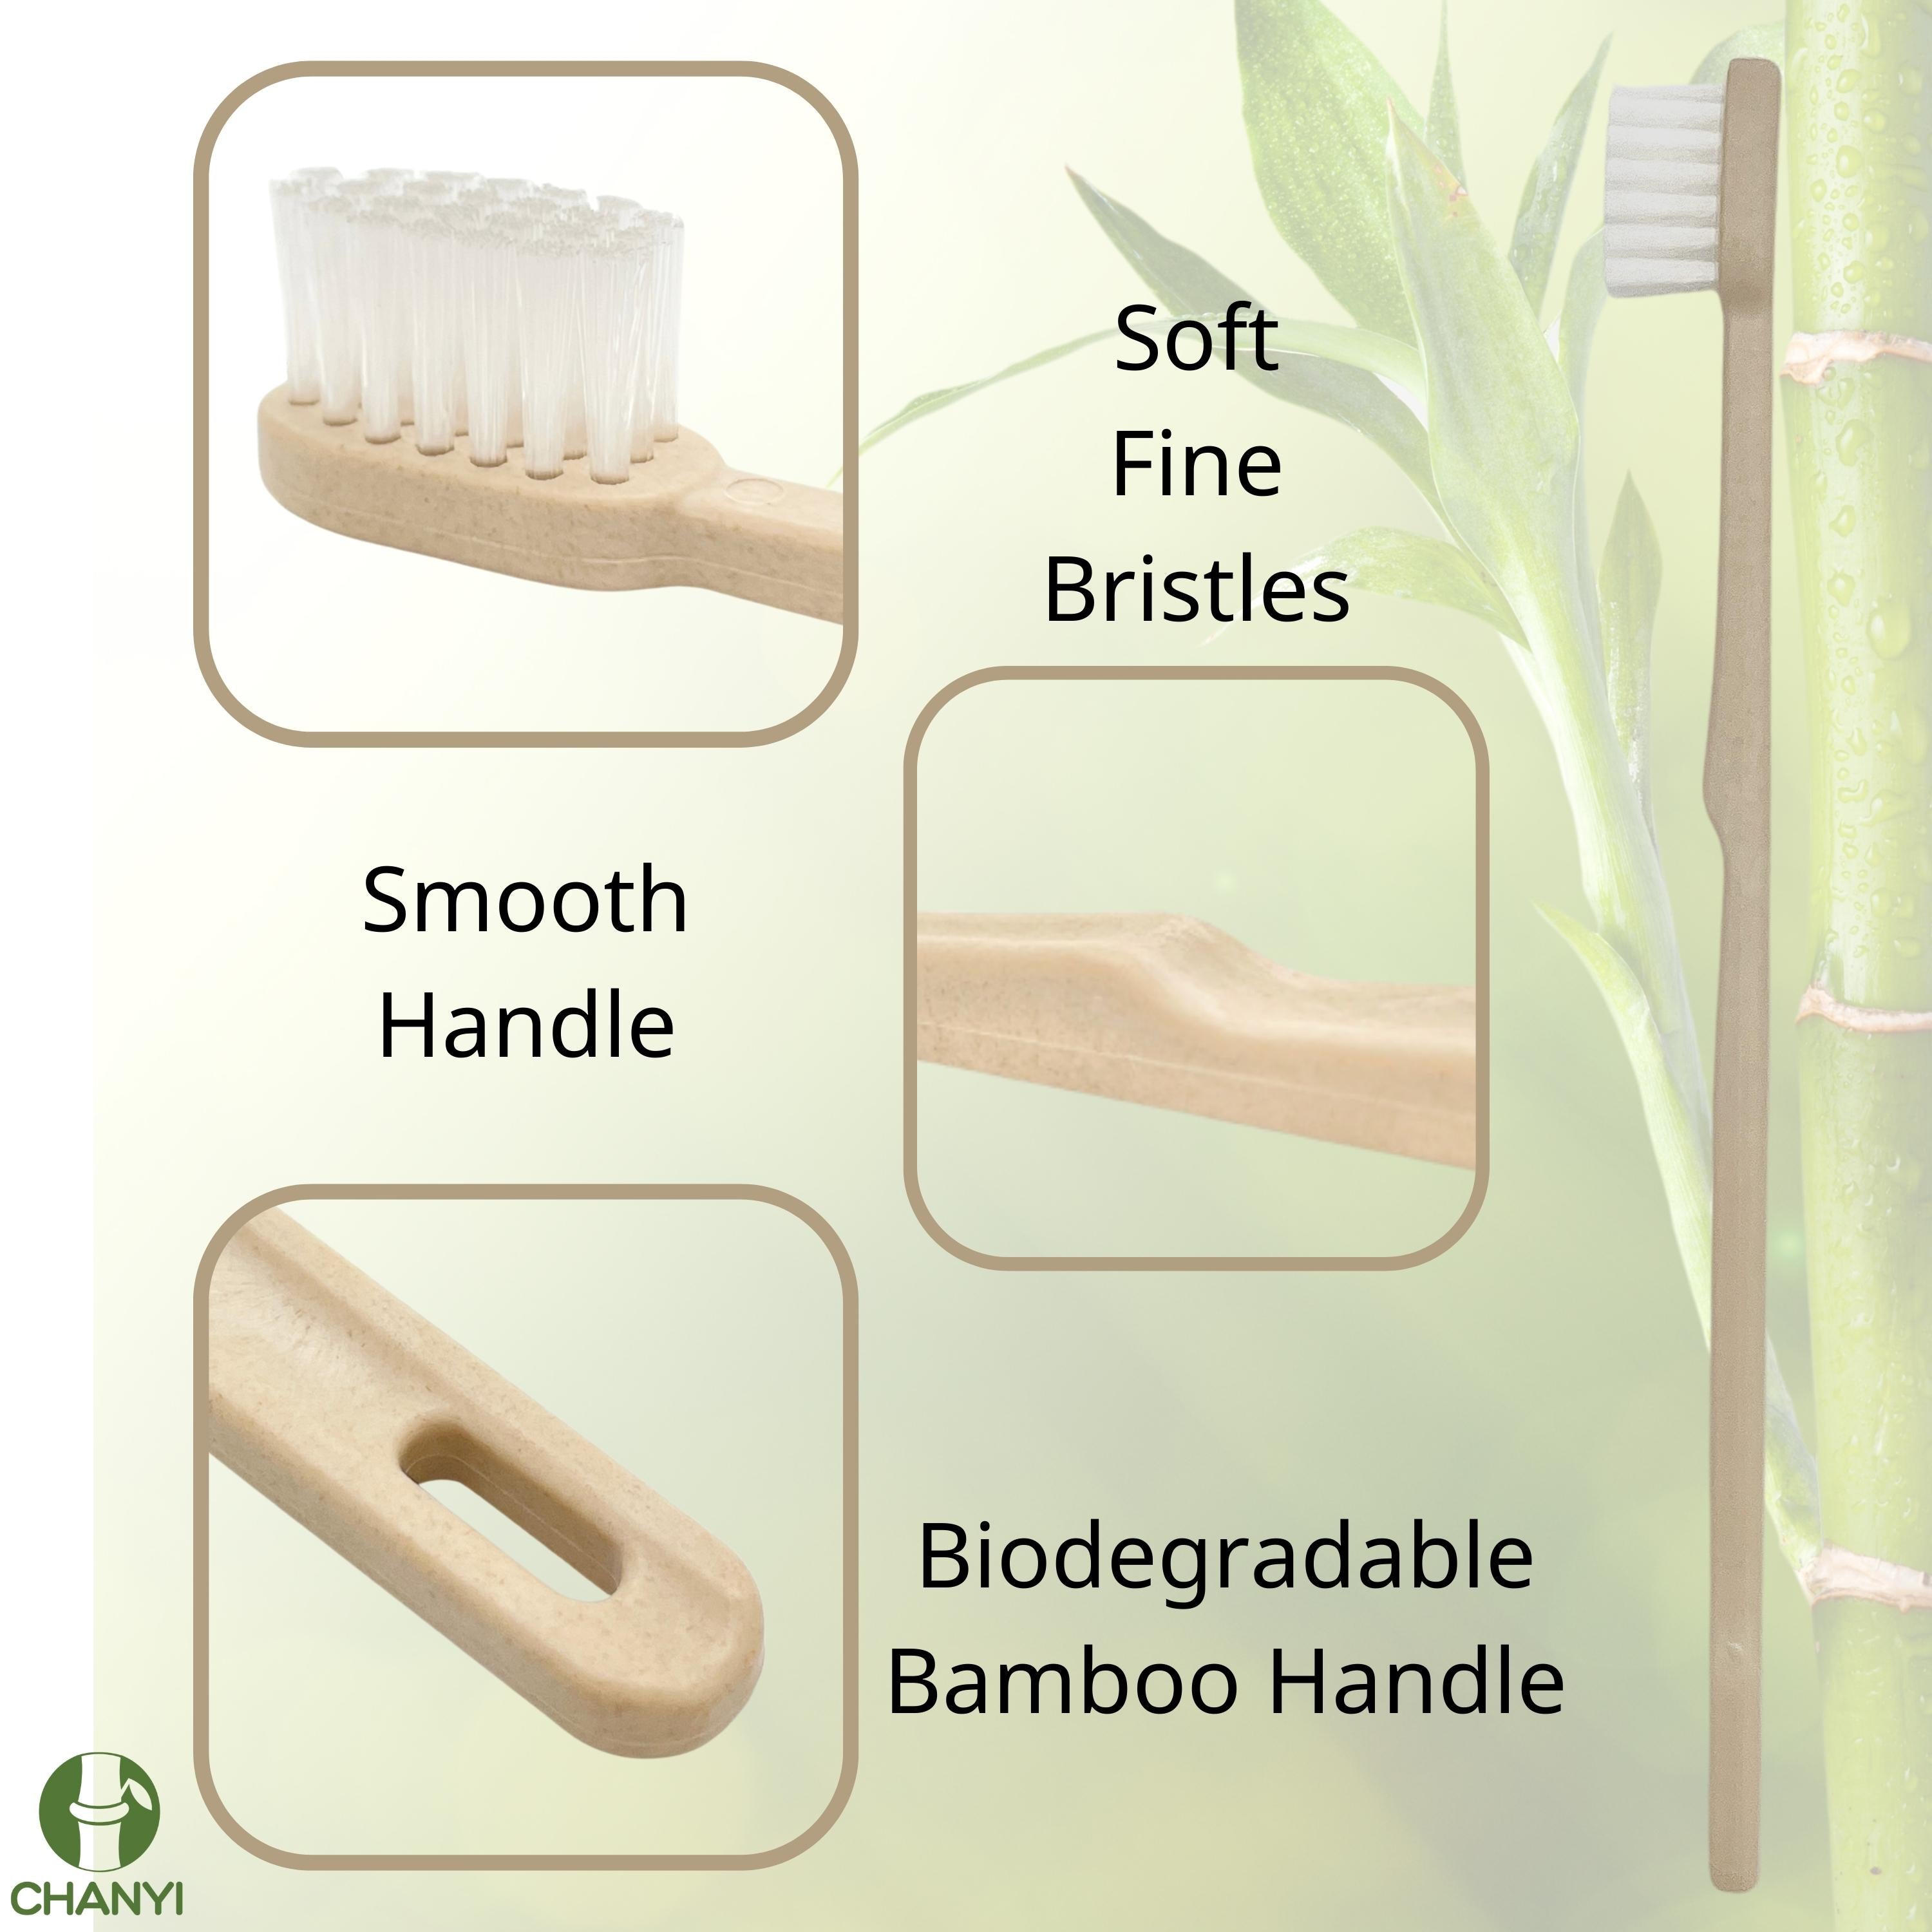 bpa-free soft bristles natural bamboo toothbrush green teeth brushes recyclable manual travel hotel kit adults eco-friendly toothbrushes 10 pcs- CHANYI eco